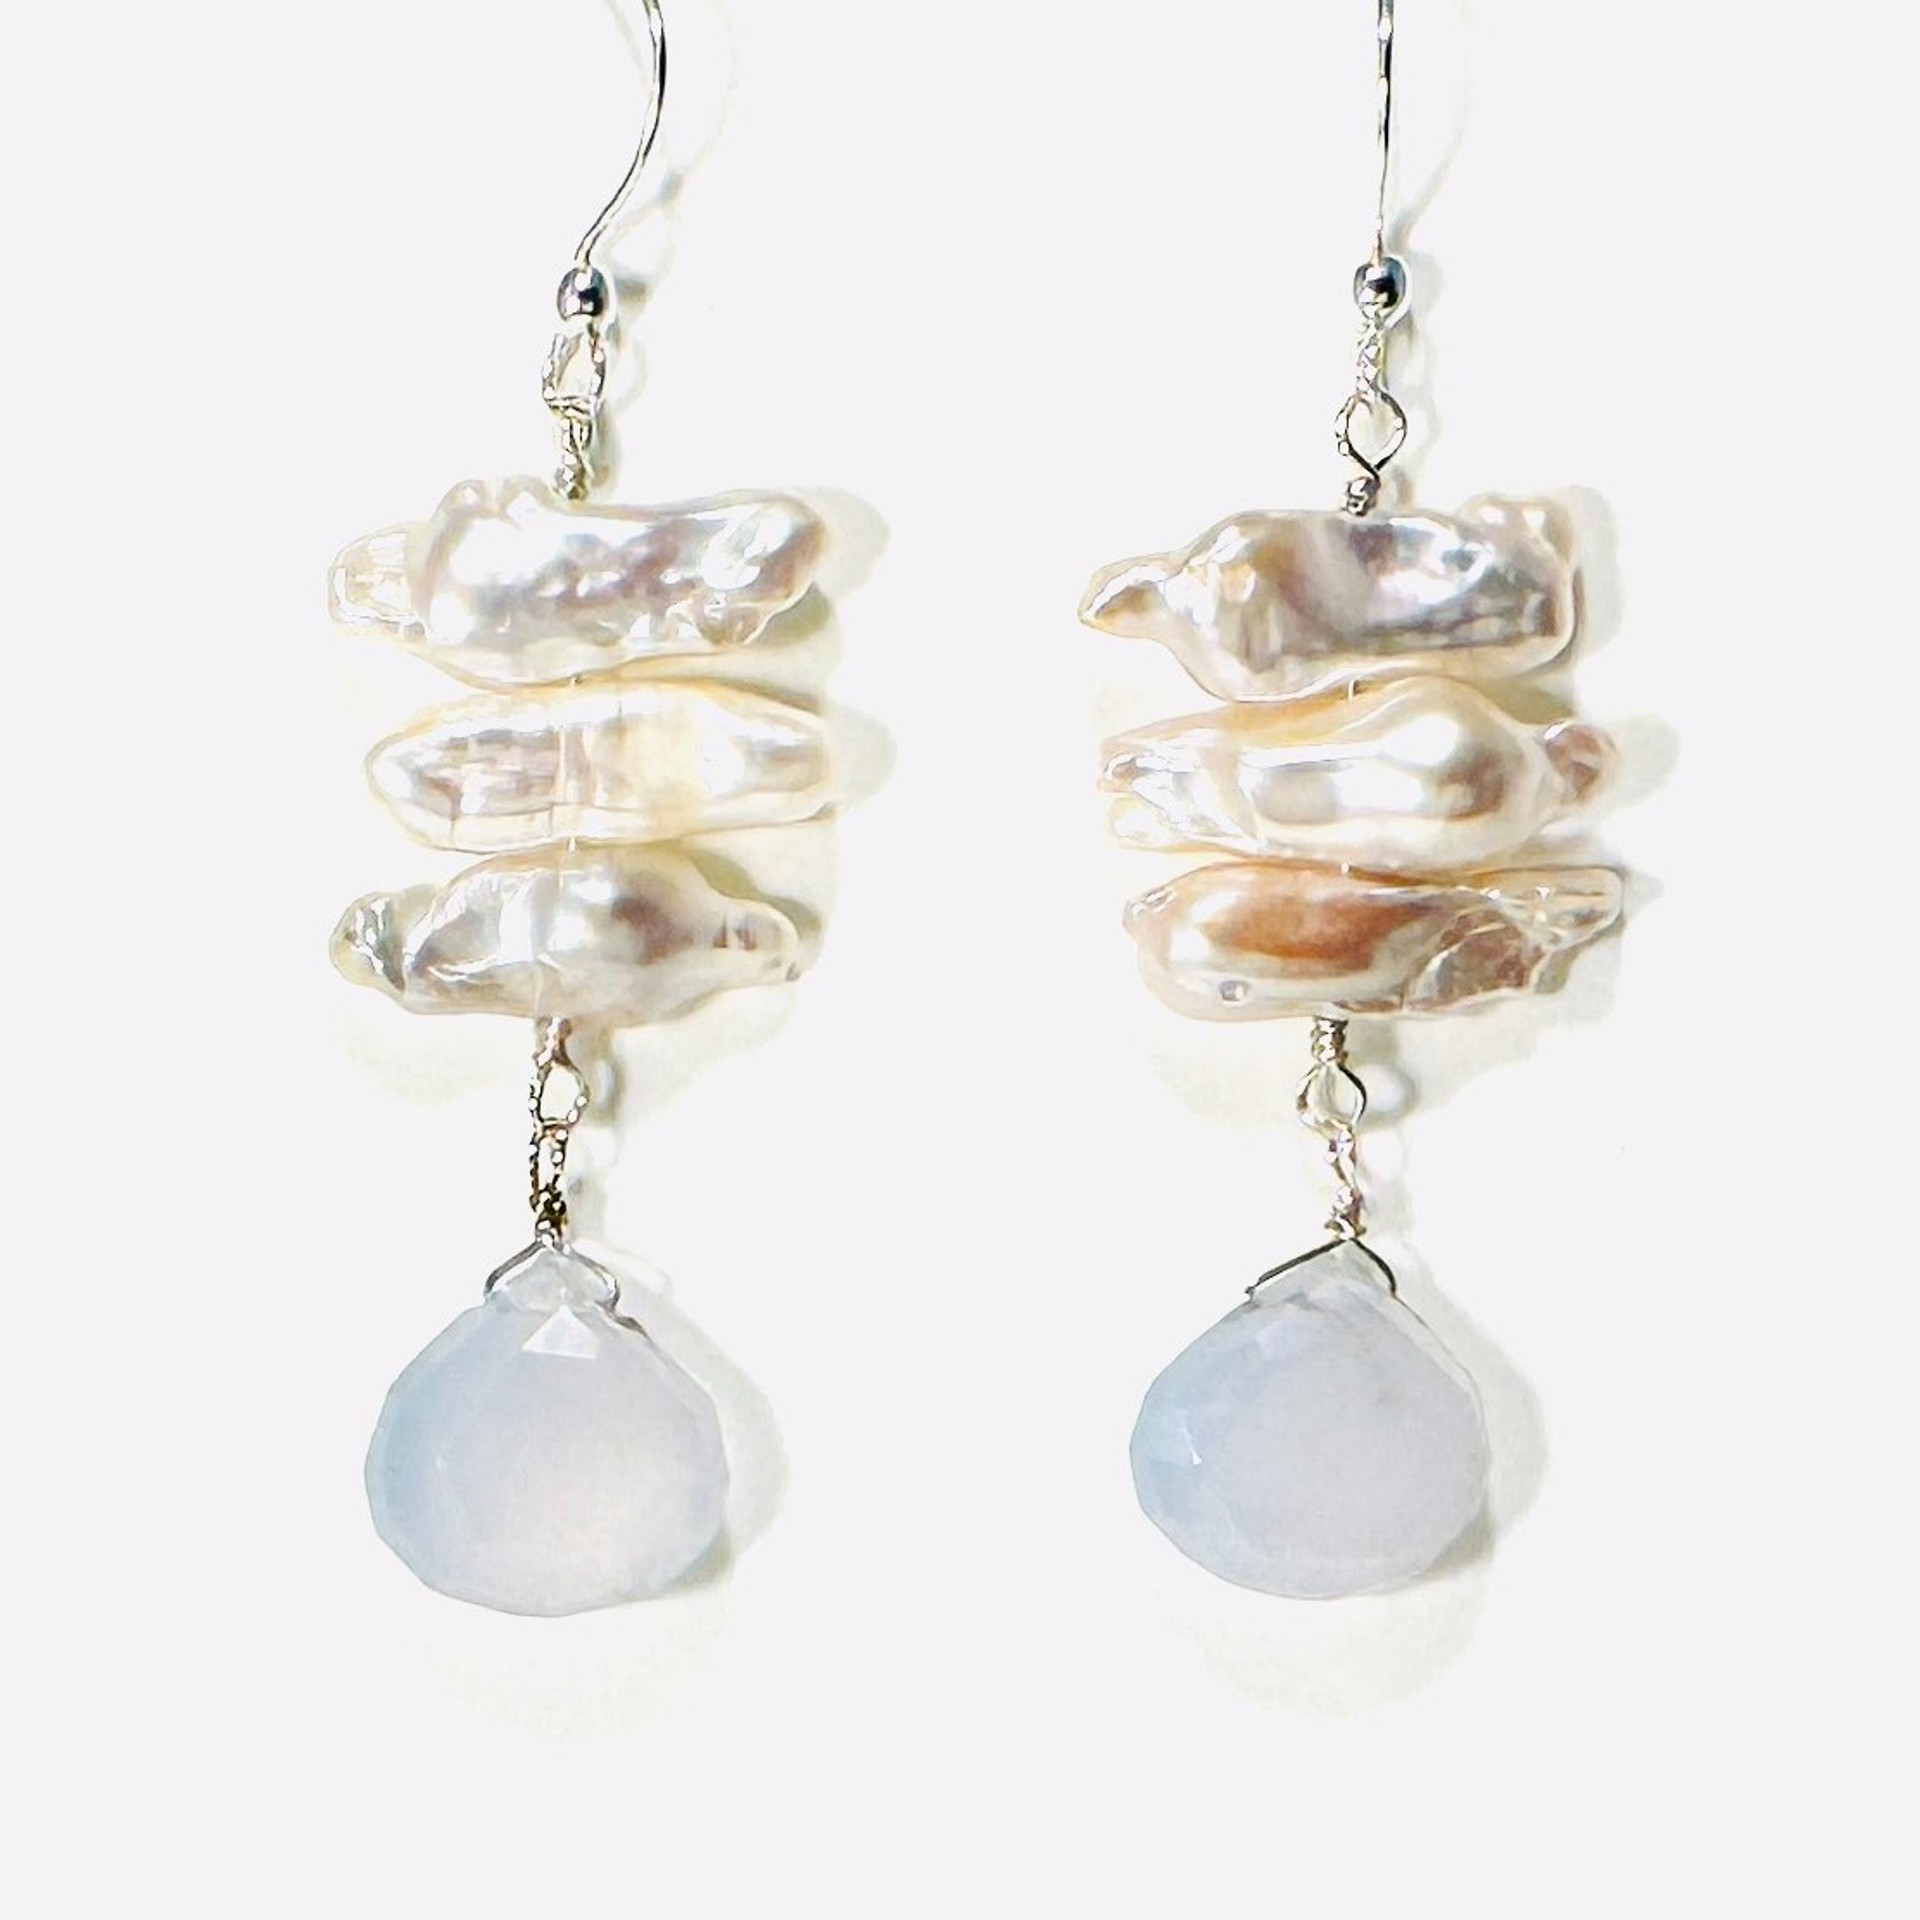 Faceted Chalcedony, Biwa Pearl Earrings LR24-13 by Legare Riano